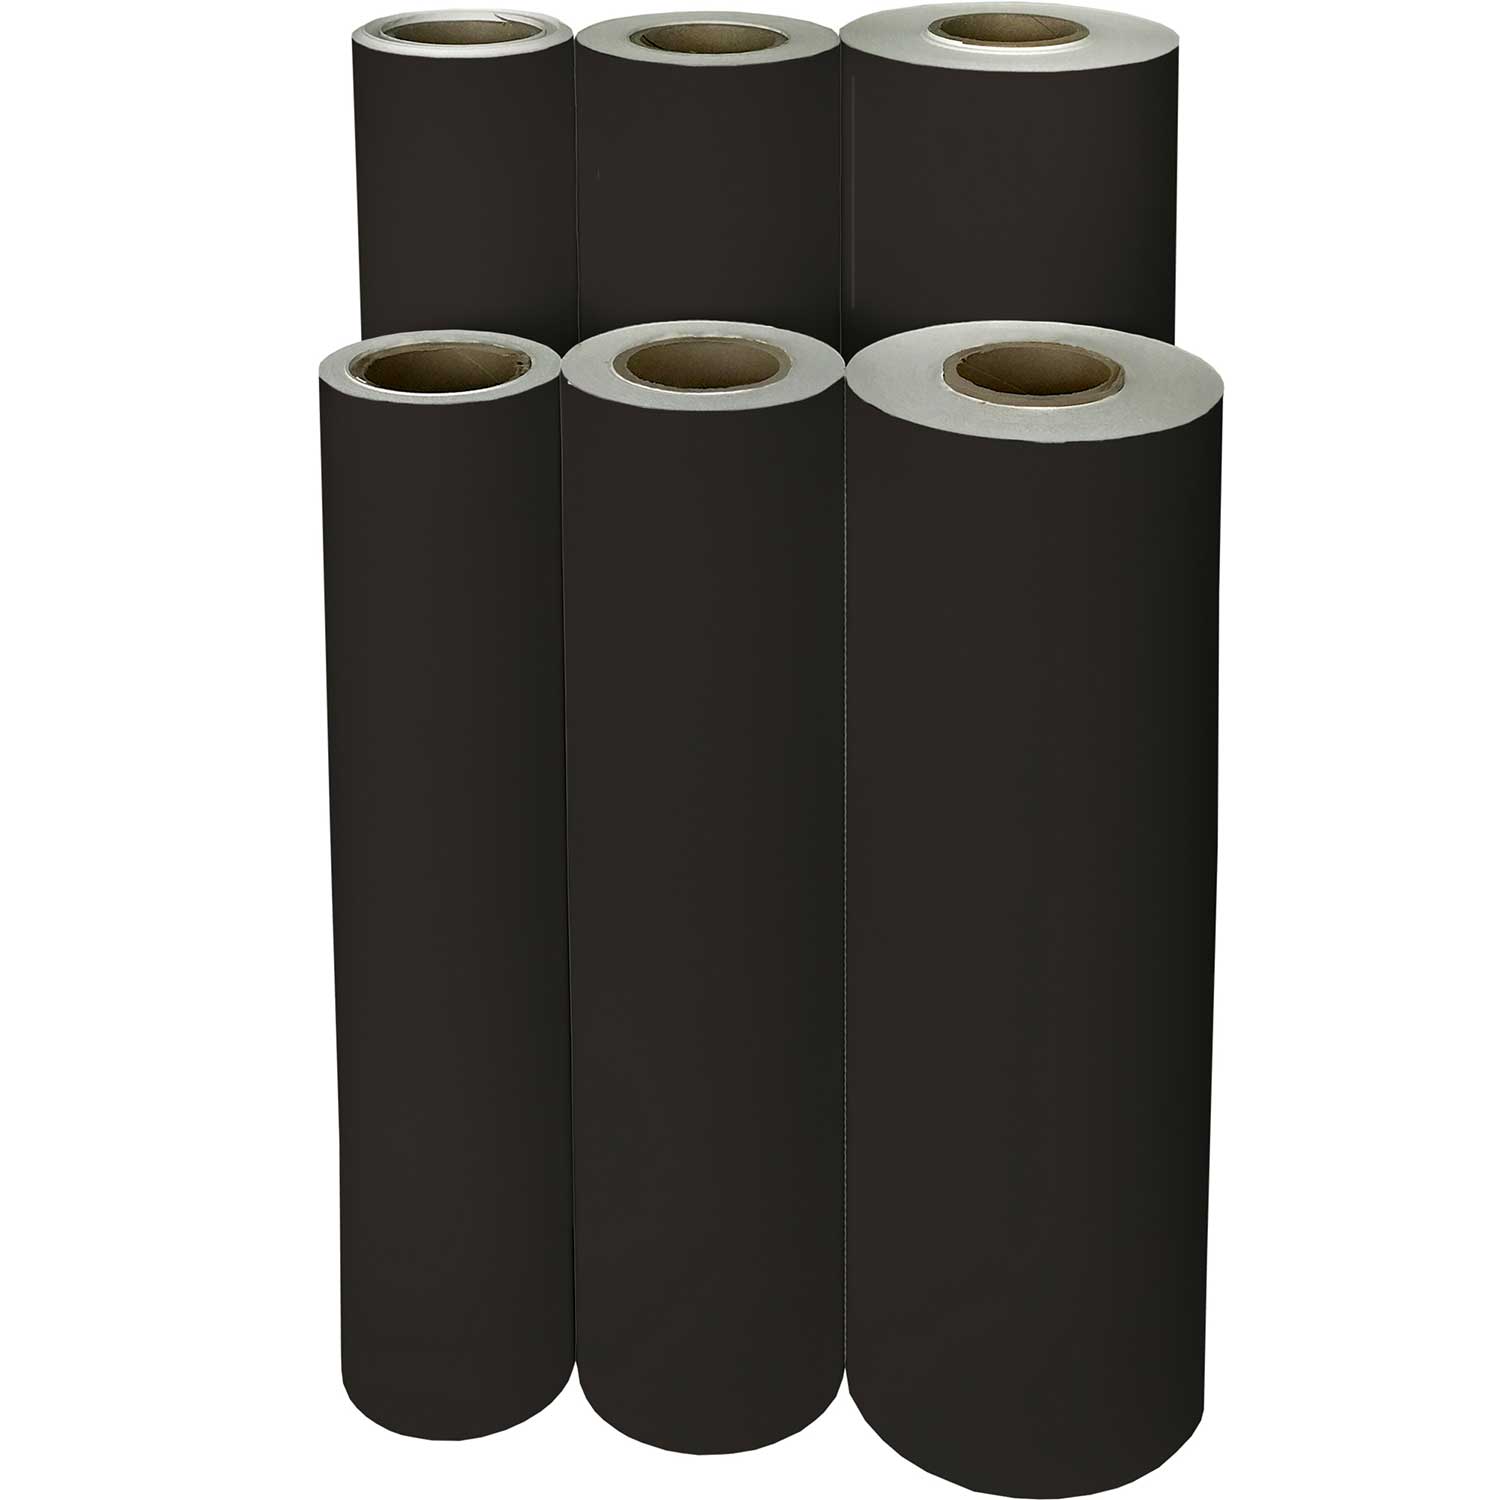 Solid black wrapping paper - matte, glossy, linen